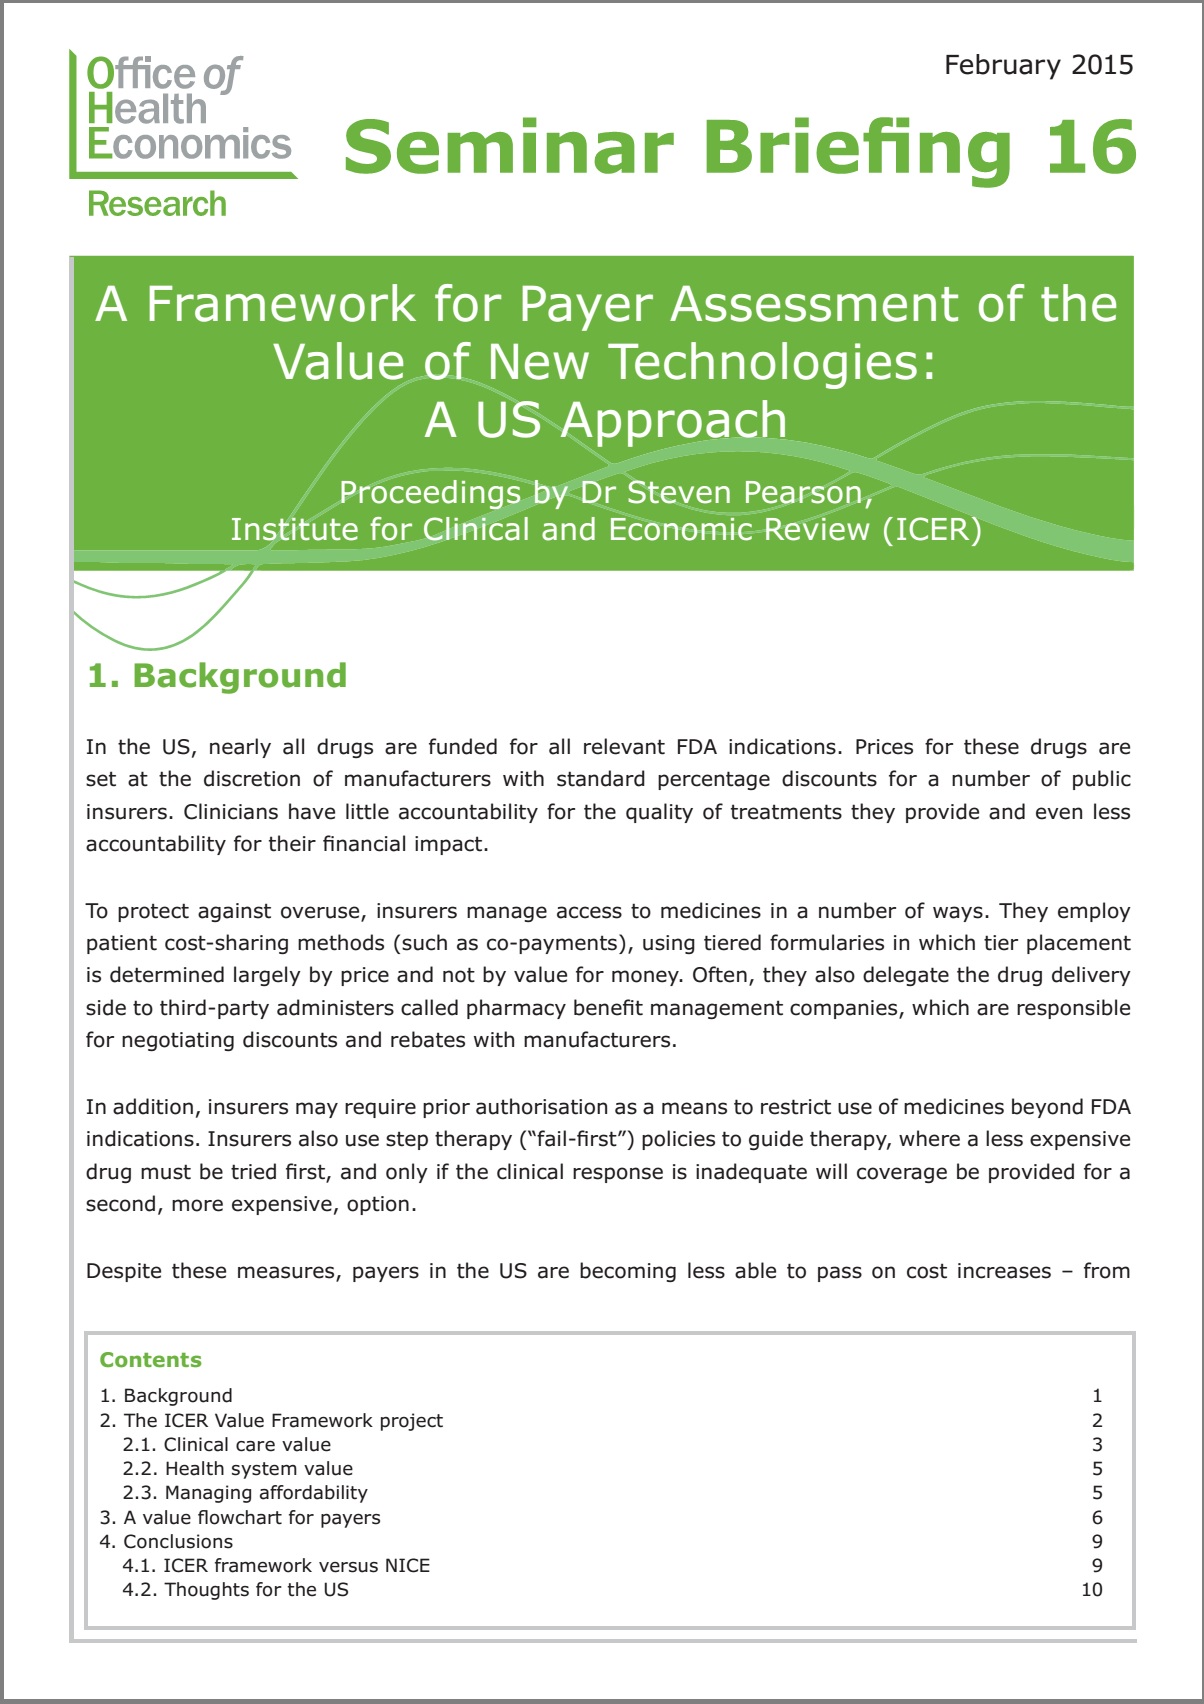 A Framework for Payer Assessment of the Value of New Technologies: A US Approach